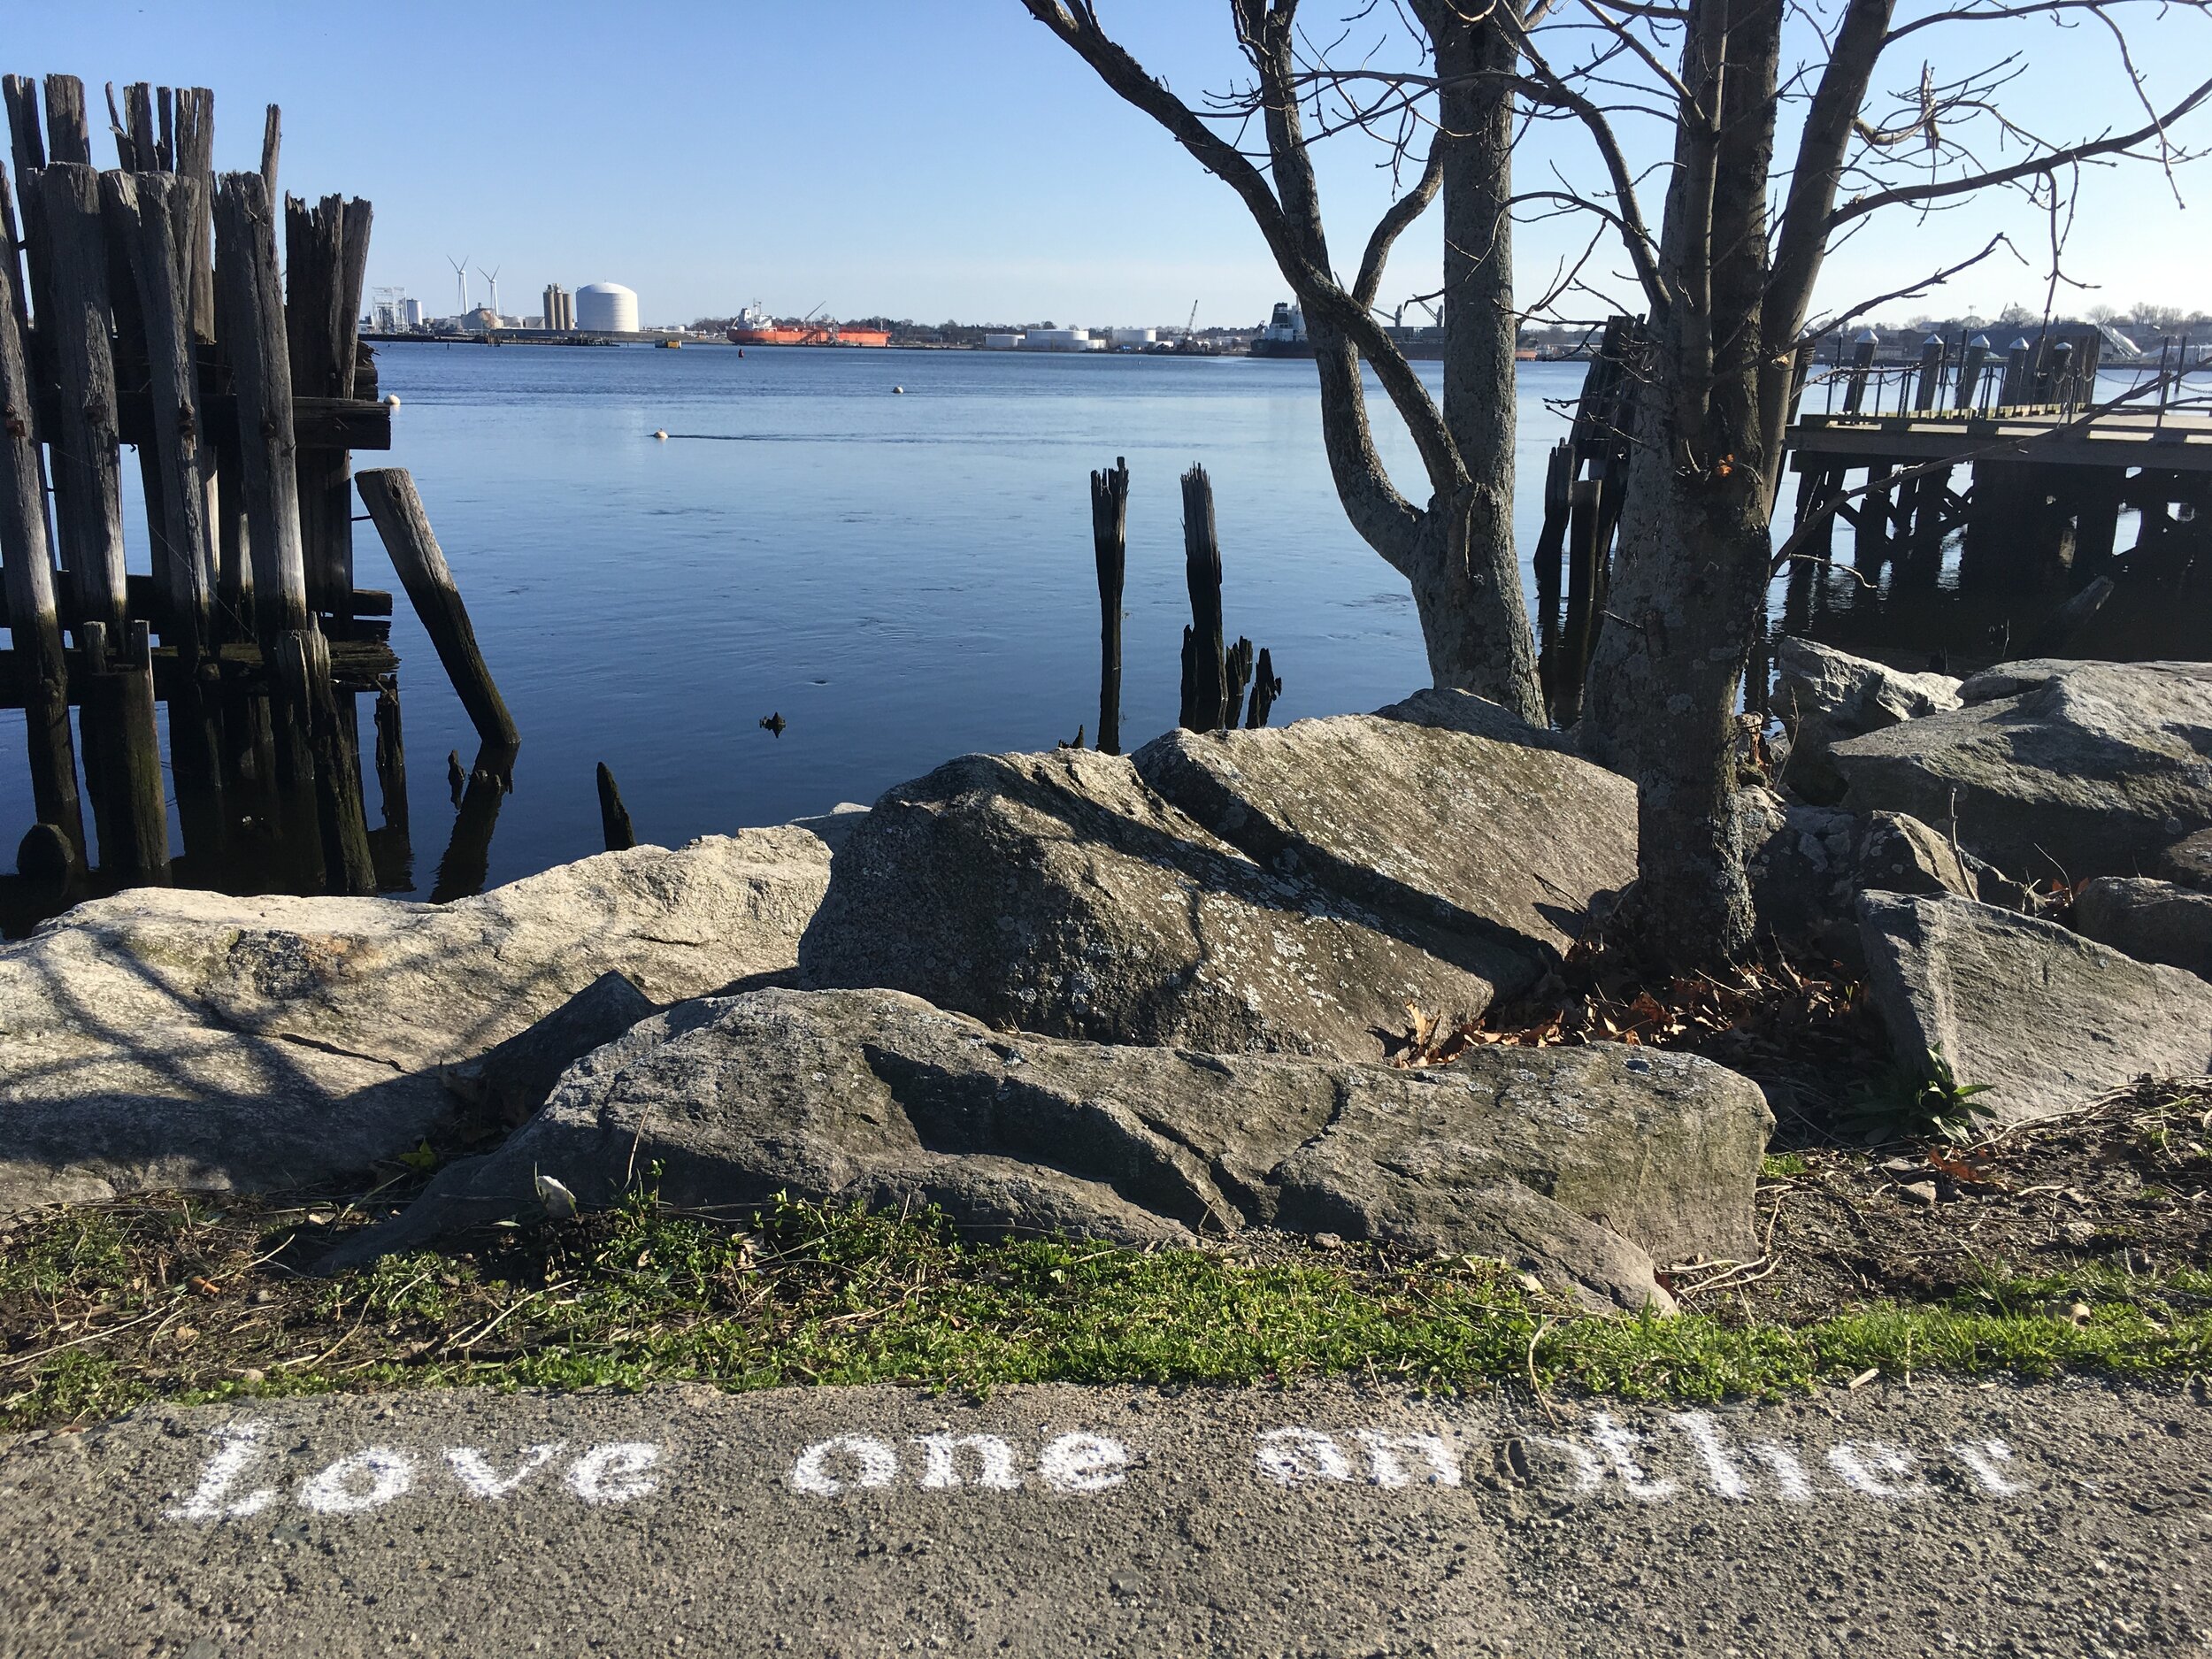  "Love one another." — Jesus  India Point Park, PVD  April 2020 